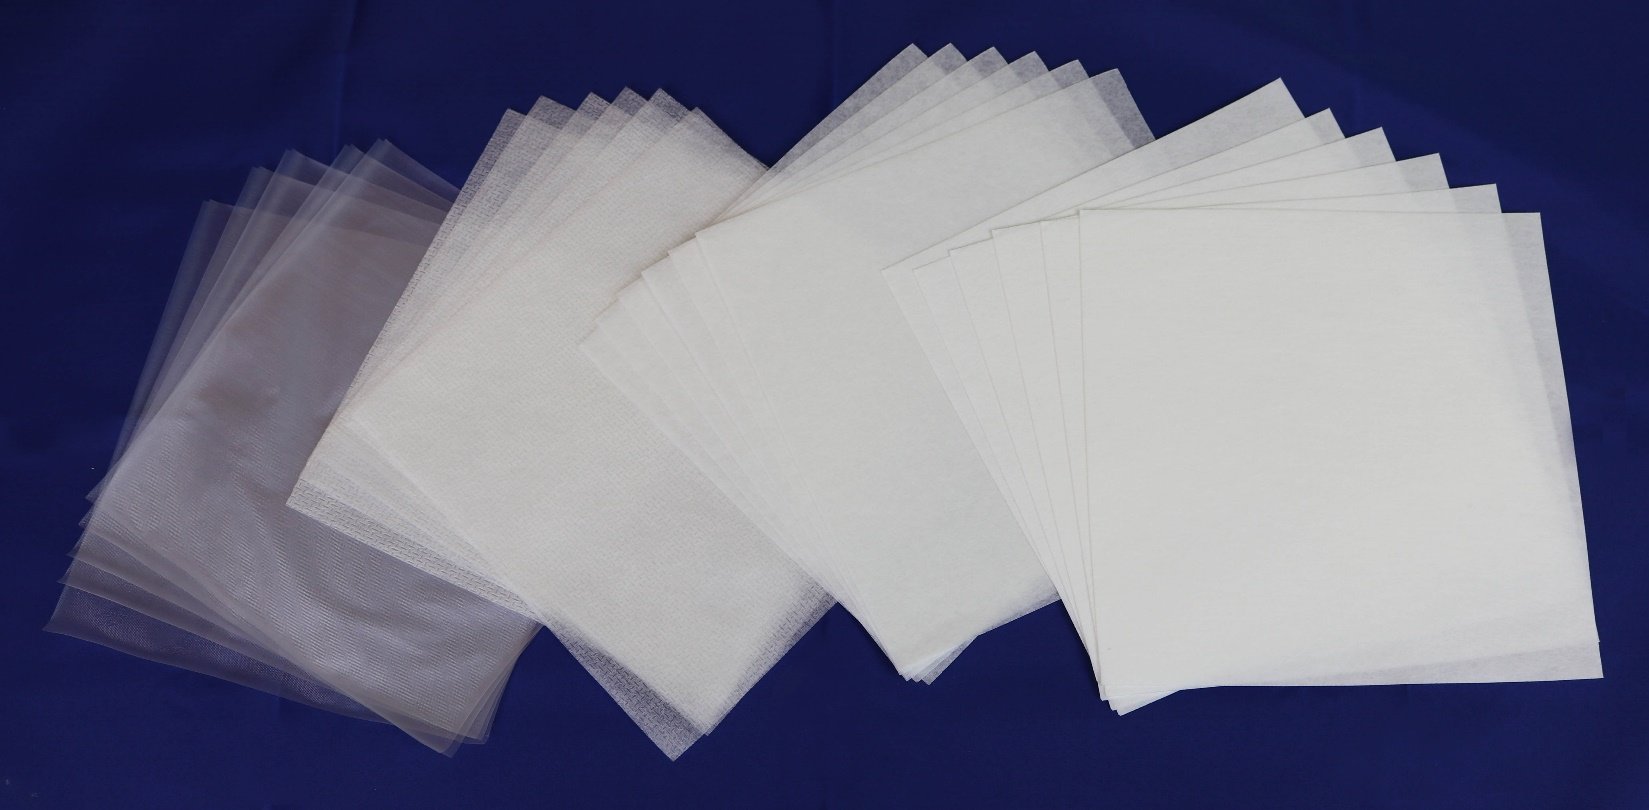 10 x 12 inch 100 Pre-Cut Sheets Tear Away Stabilizer for Embroidery